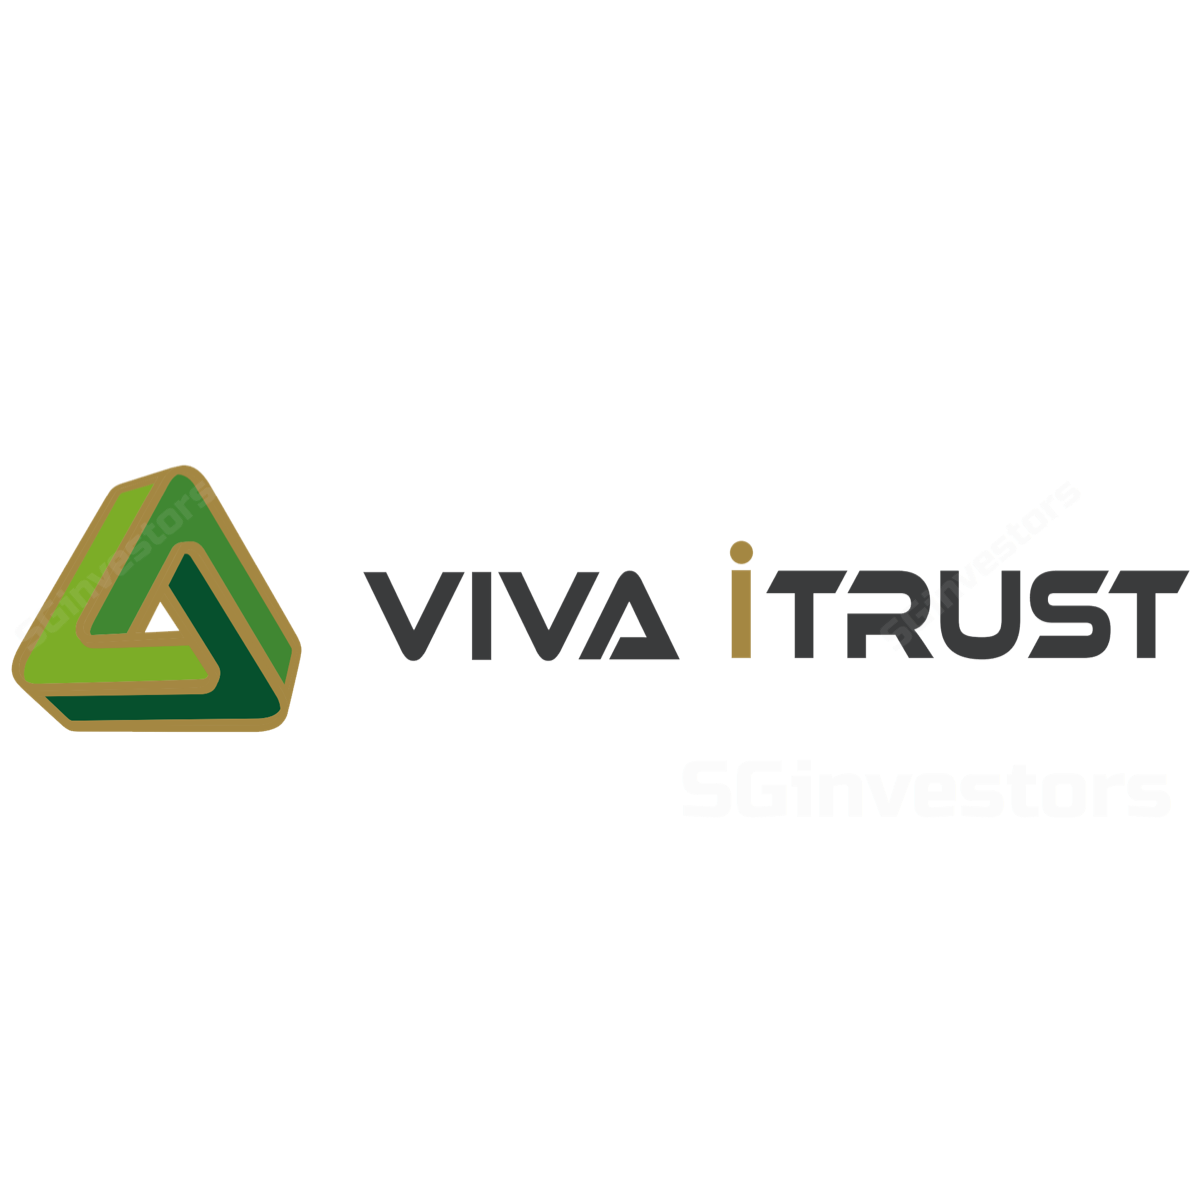 Viva Industrial Trust - CIMB Research 2017-01-09: Rose among the thorns